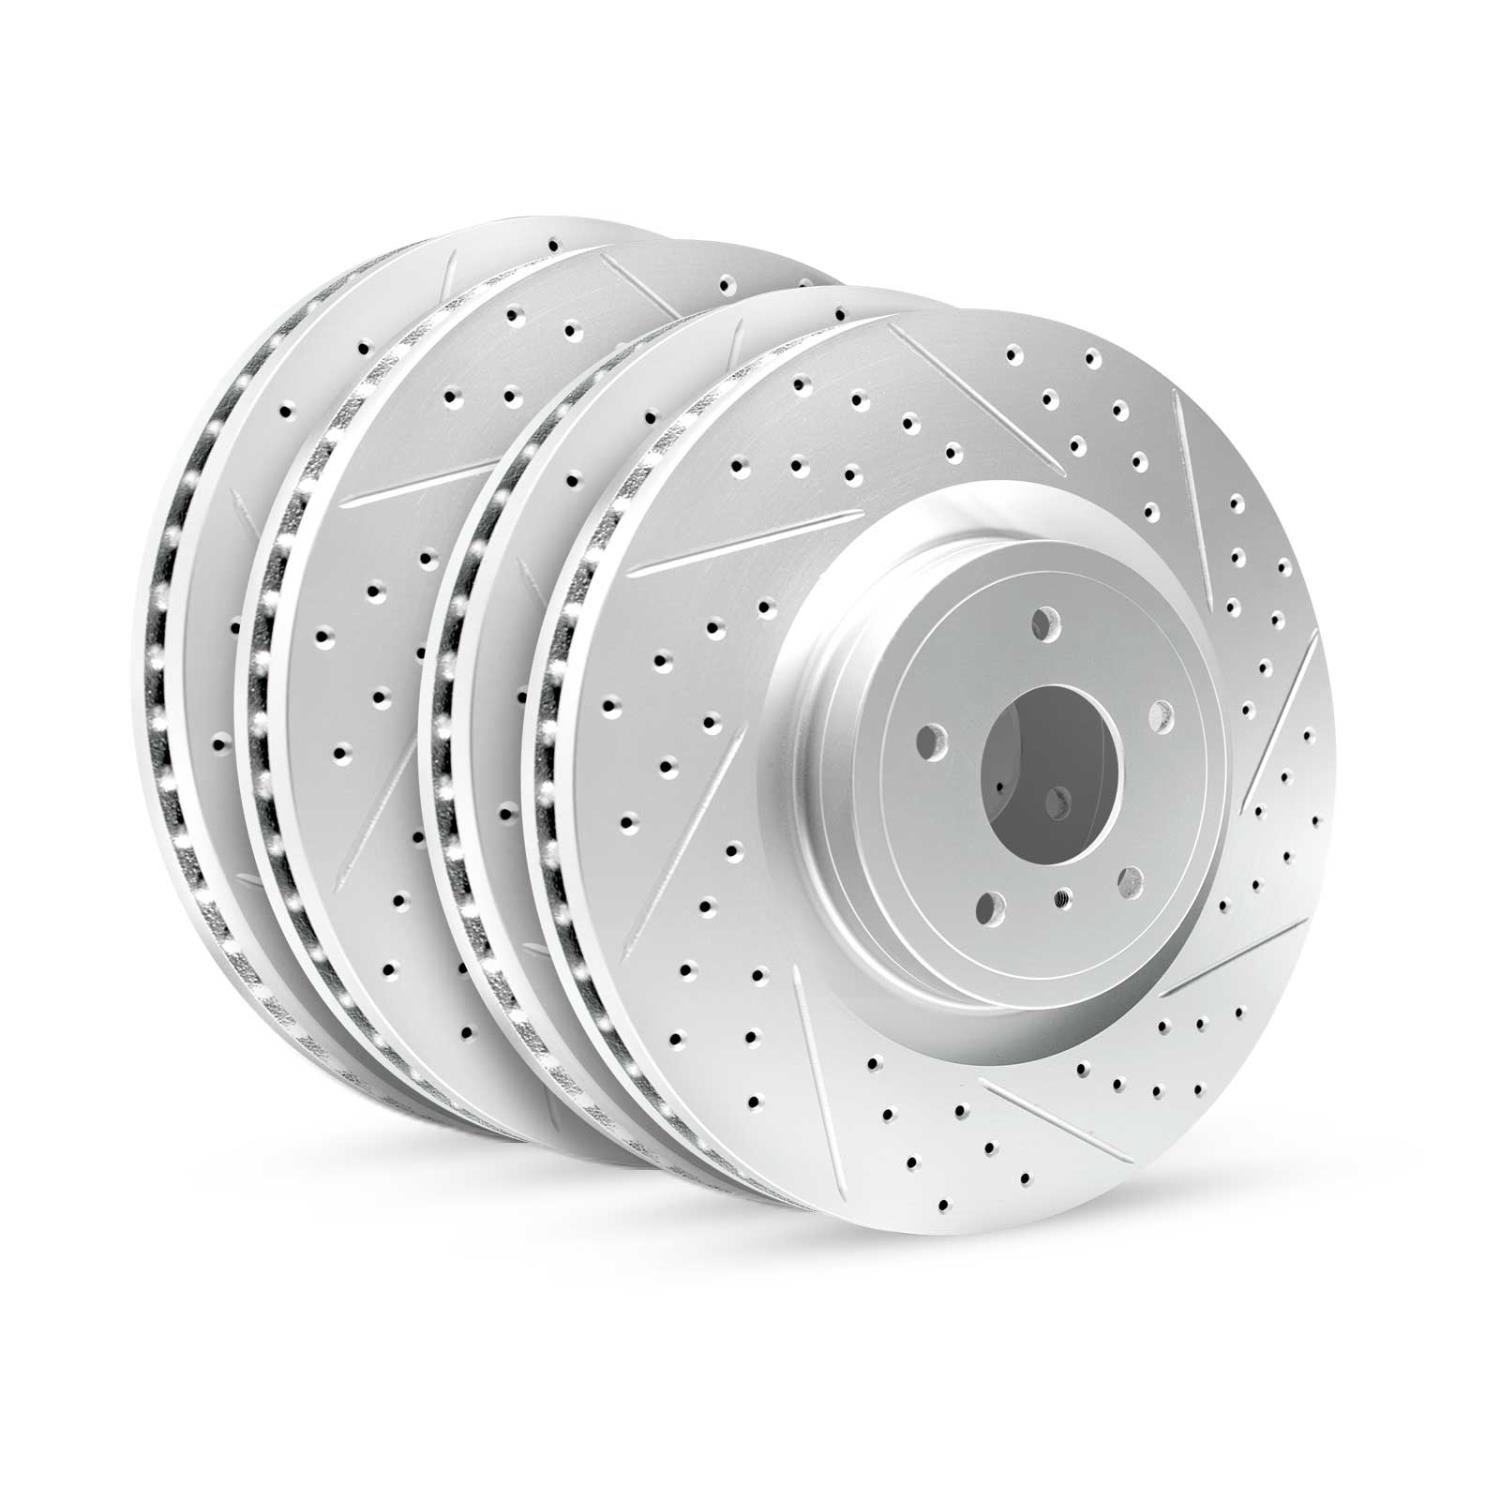 GEO-Carbon Drilled/Slotted Rotors, 2020-2020 Mercedes-Benz, Position: Front/Rear